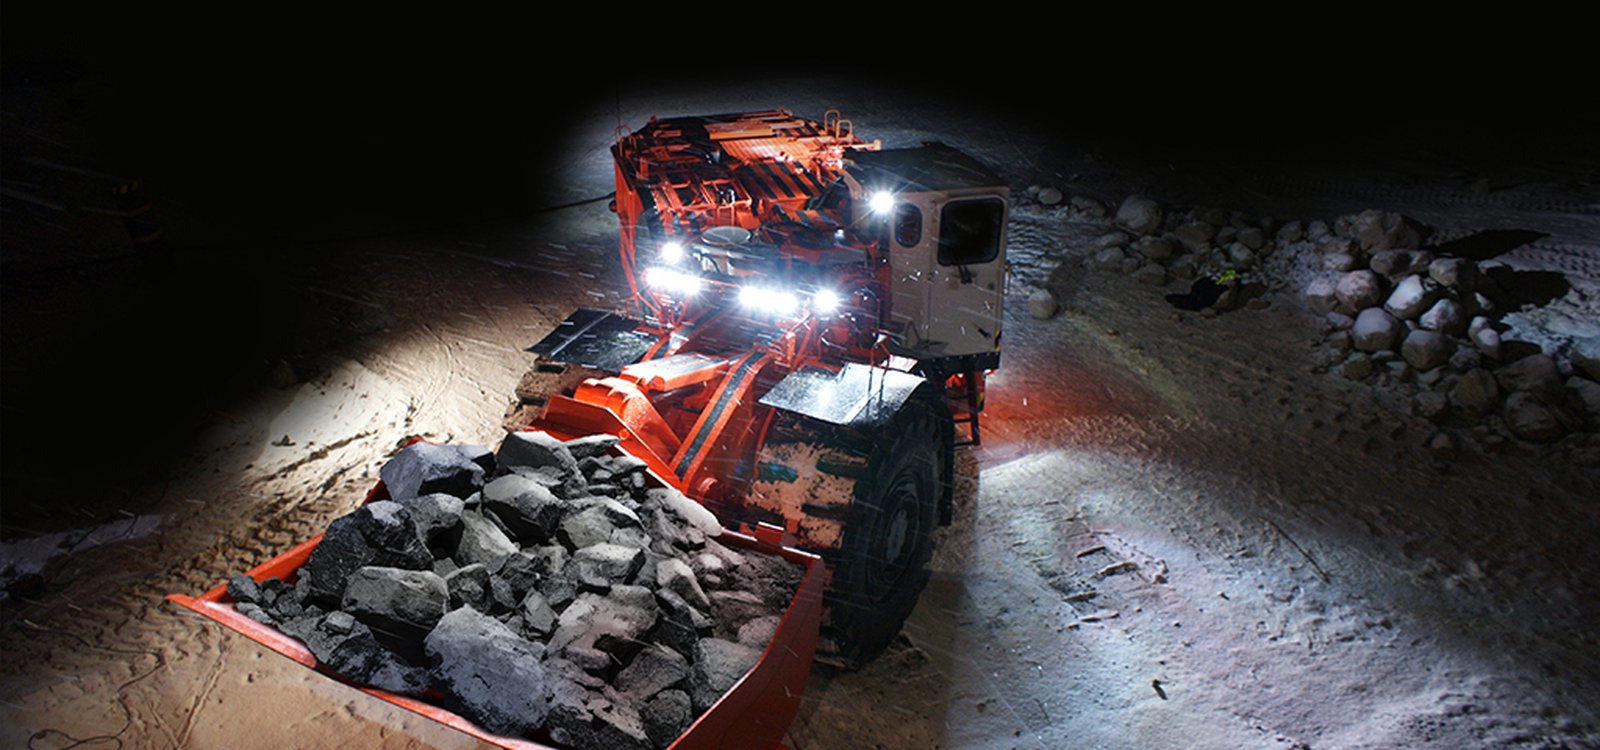 Automation in mining is relatively new, so each application needs its own safety requirement. 